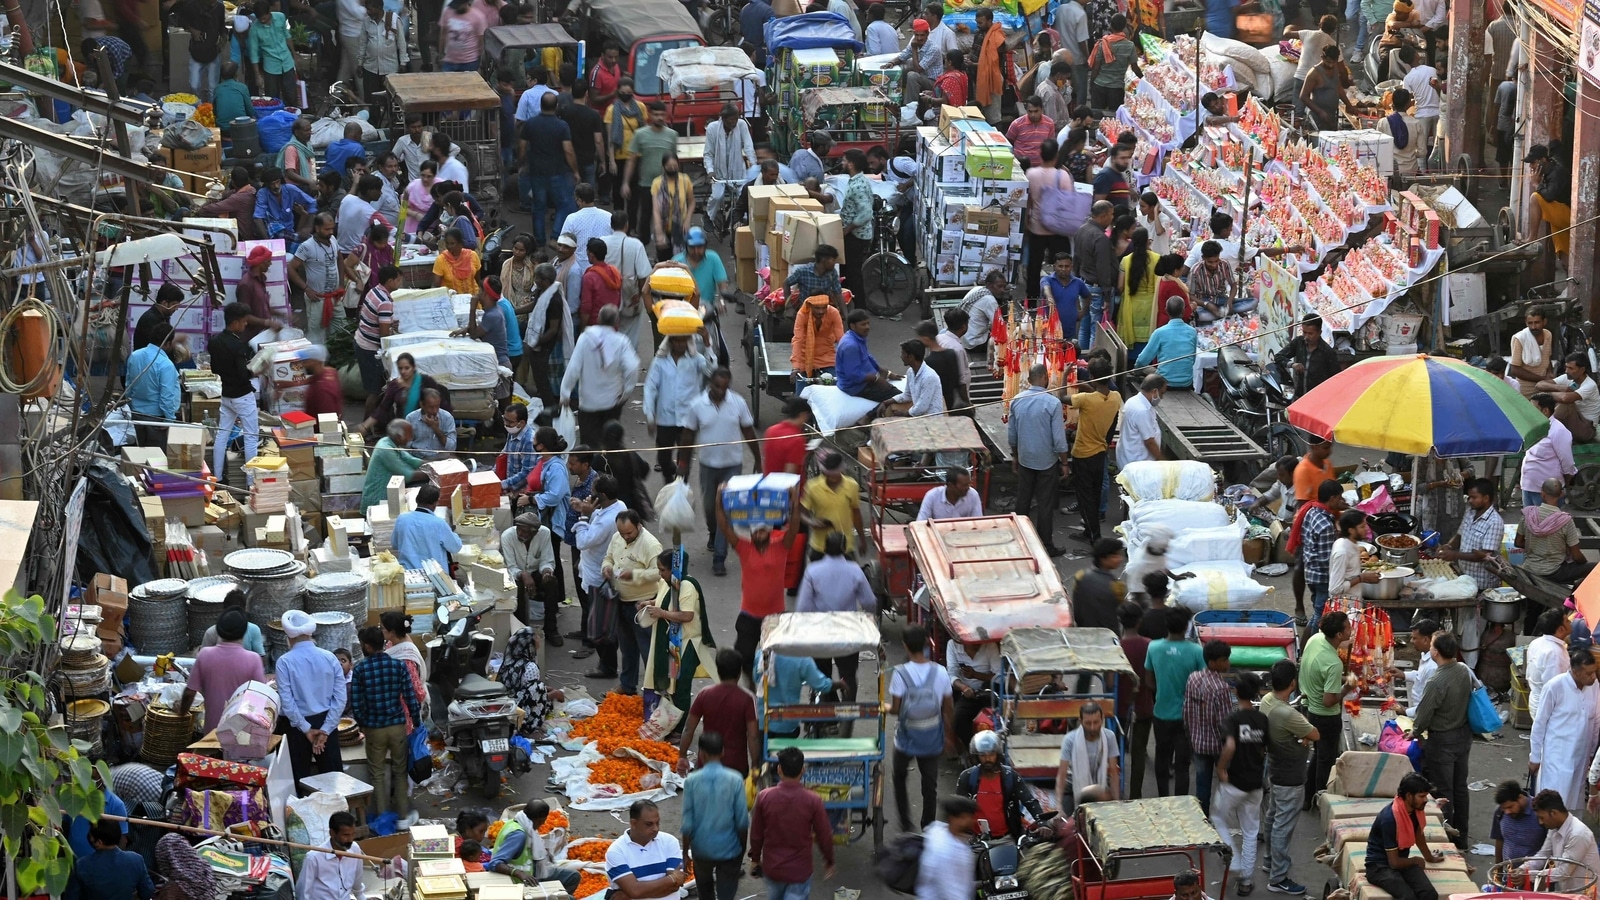 India urban cities to see population explosion in coming decades